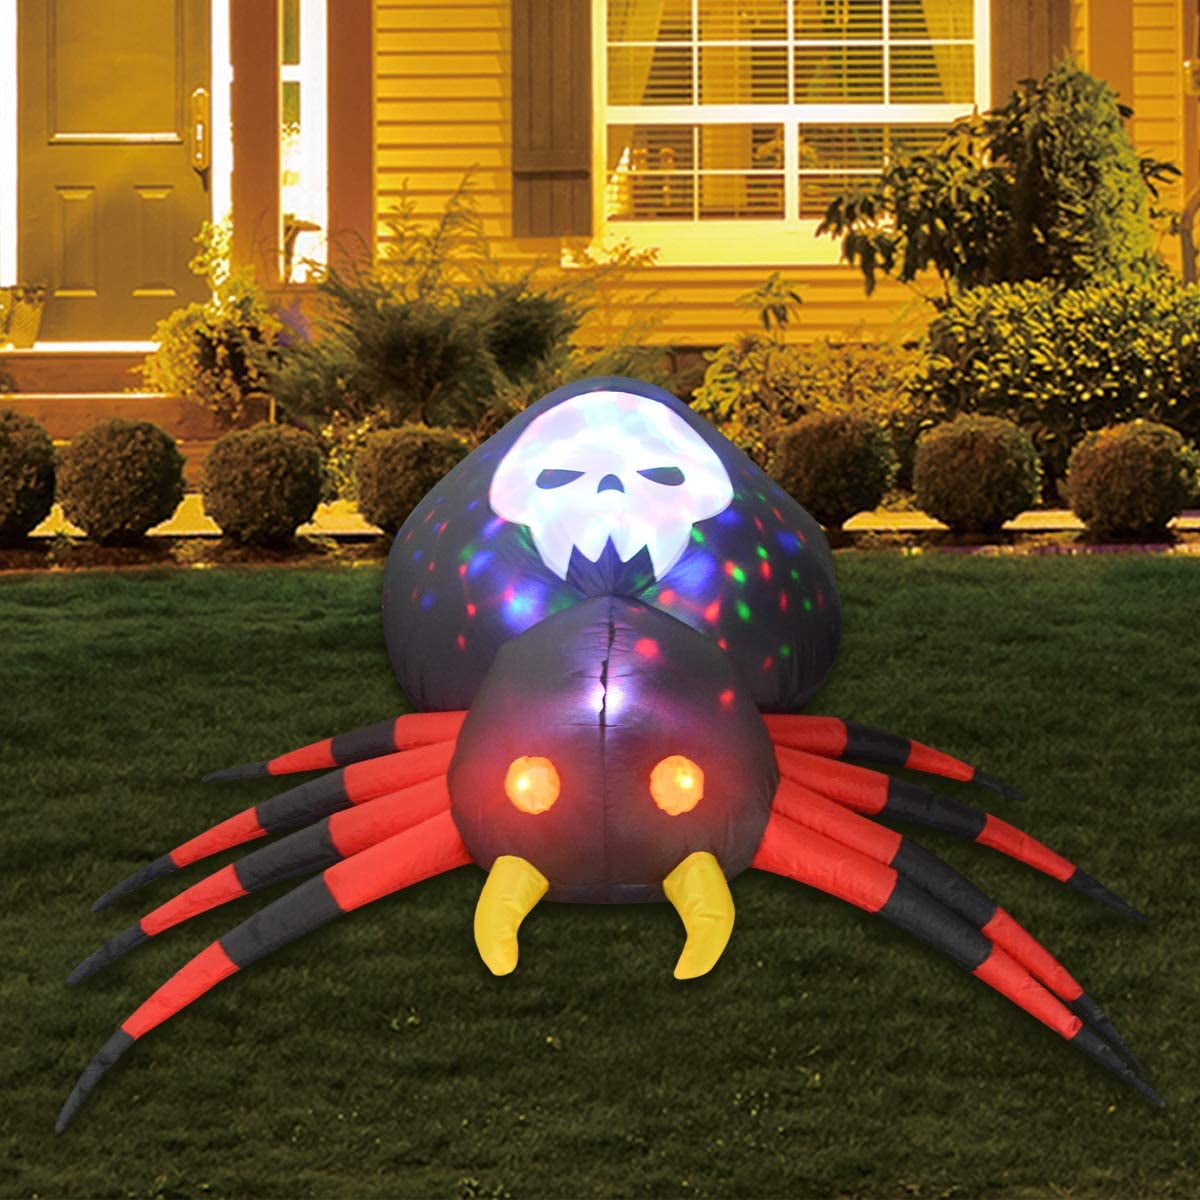 6FT Inflatable Halloween Spider with Magic Light Blow Up Yard Decor Indoor/Outdoor Decorations